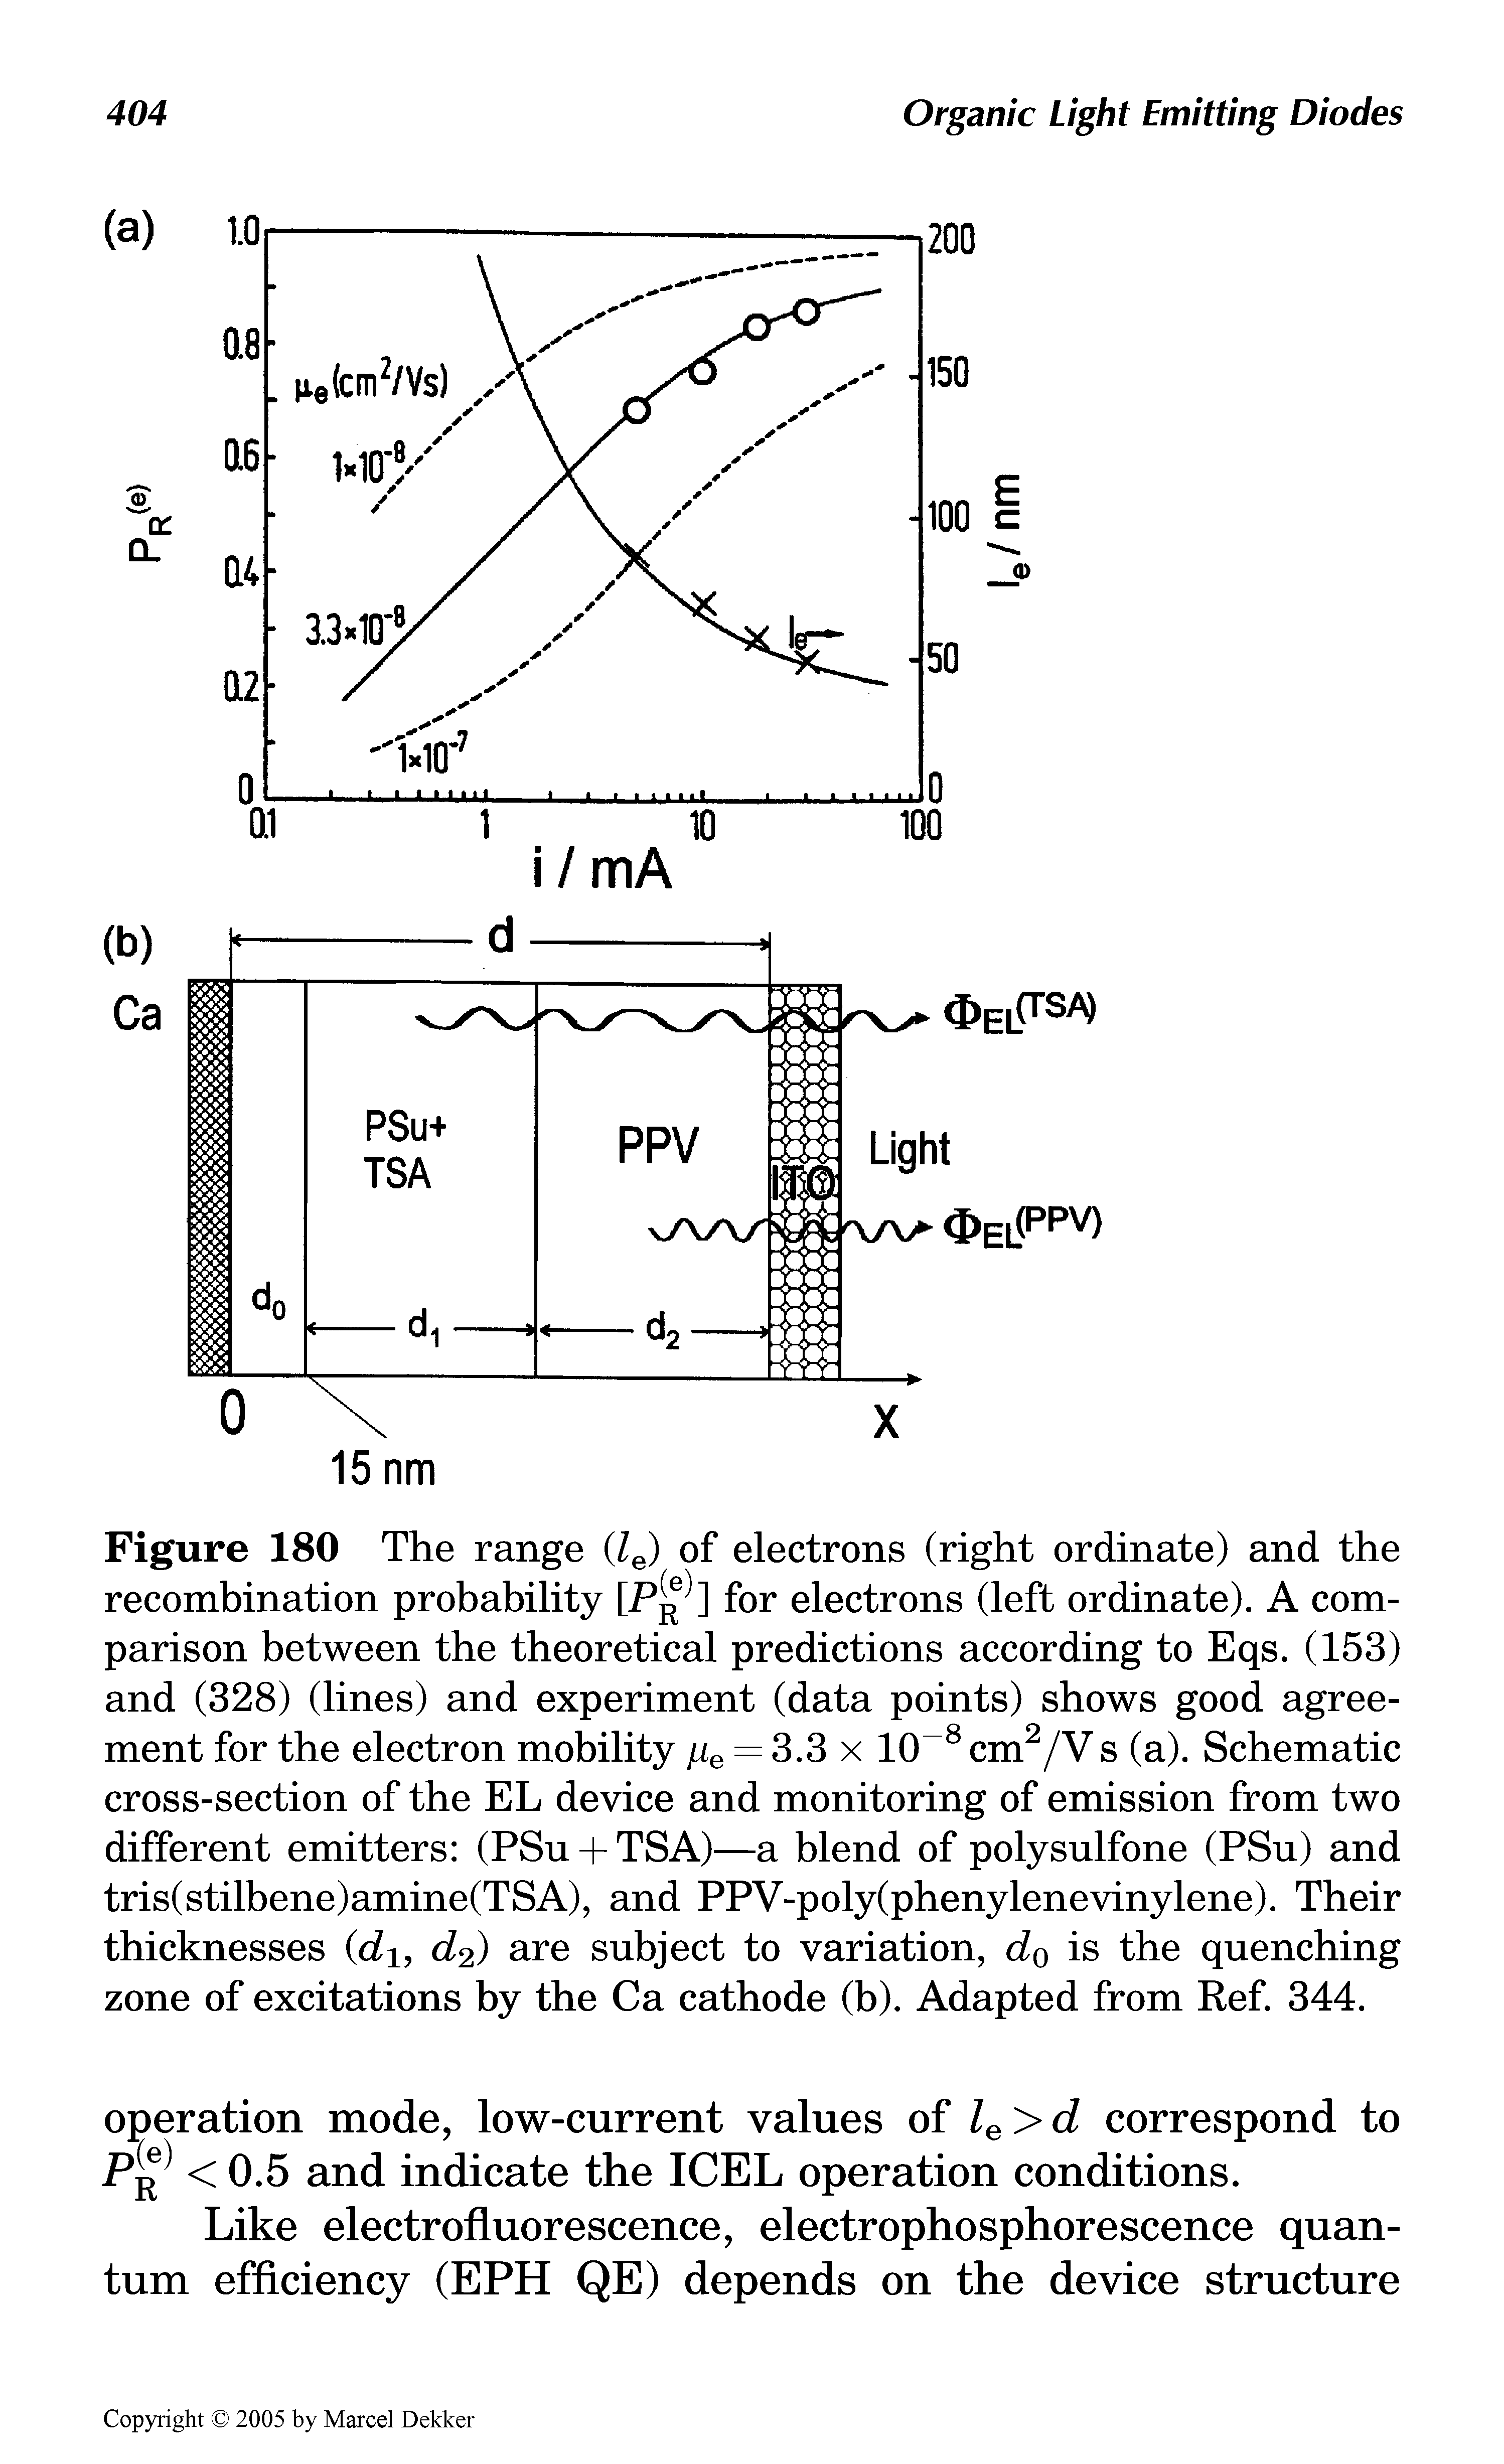 Figure 180 The range (Ze) of electrons (right ordinate) and the recombination probability [P ] for electrons (left ordinate). A comparison between the theoretical predictions according to Eqs. (153) and (328) (lines) and experiment (data points) shows good agreement for the electron mobility jie = 3.3 x 10-8 cm2/V s (a). Schematic cross-section of the EL device and monitoring of emission from two different emitters (PSu + TSA)—a blend of polysulfone (PSu) and tris(stilbene)amine(TSA), and PPV-poly(phenylenevinylene). Their thicknesses (dly d2) are subject to variation, d0 is the quenching zone of excitations by the Ca cathode (b). Adapted from Ref. 344.